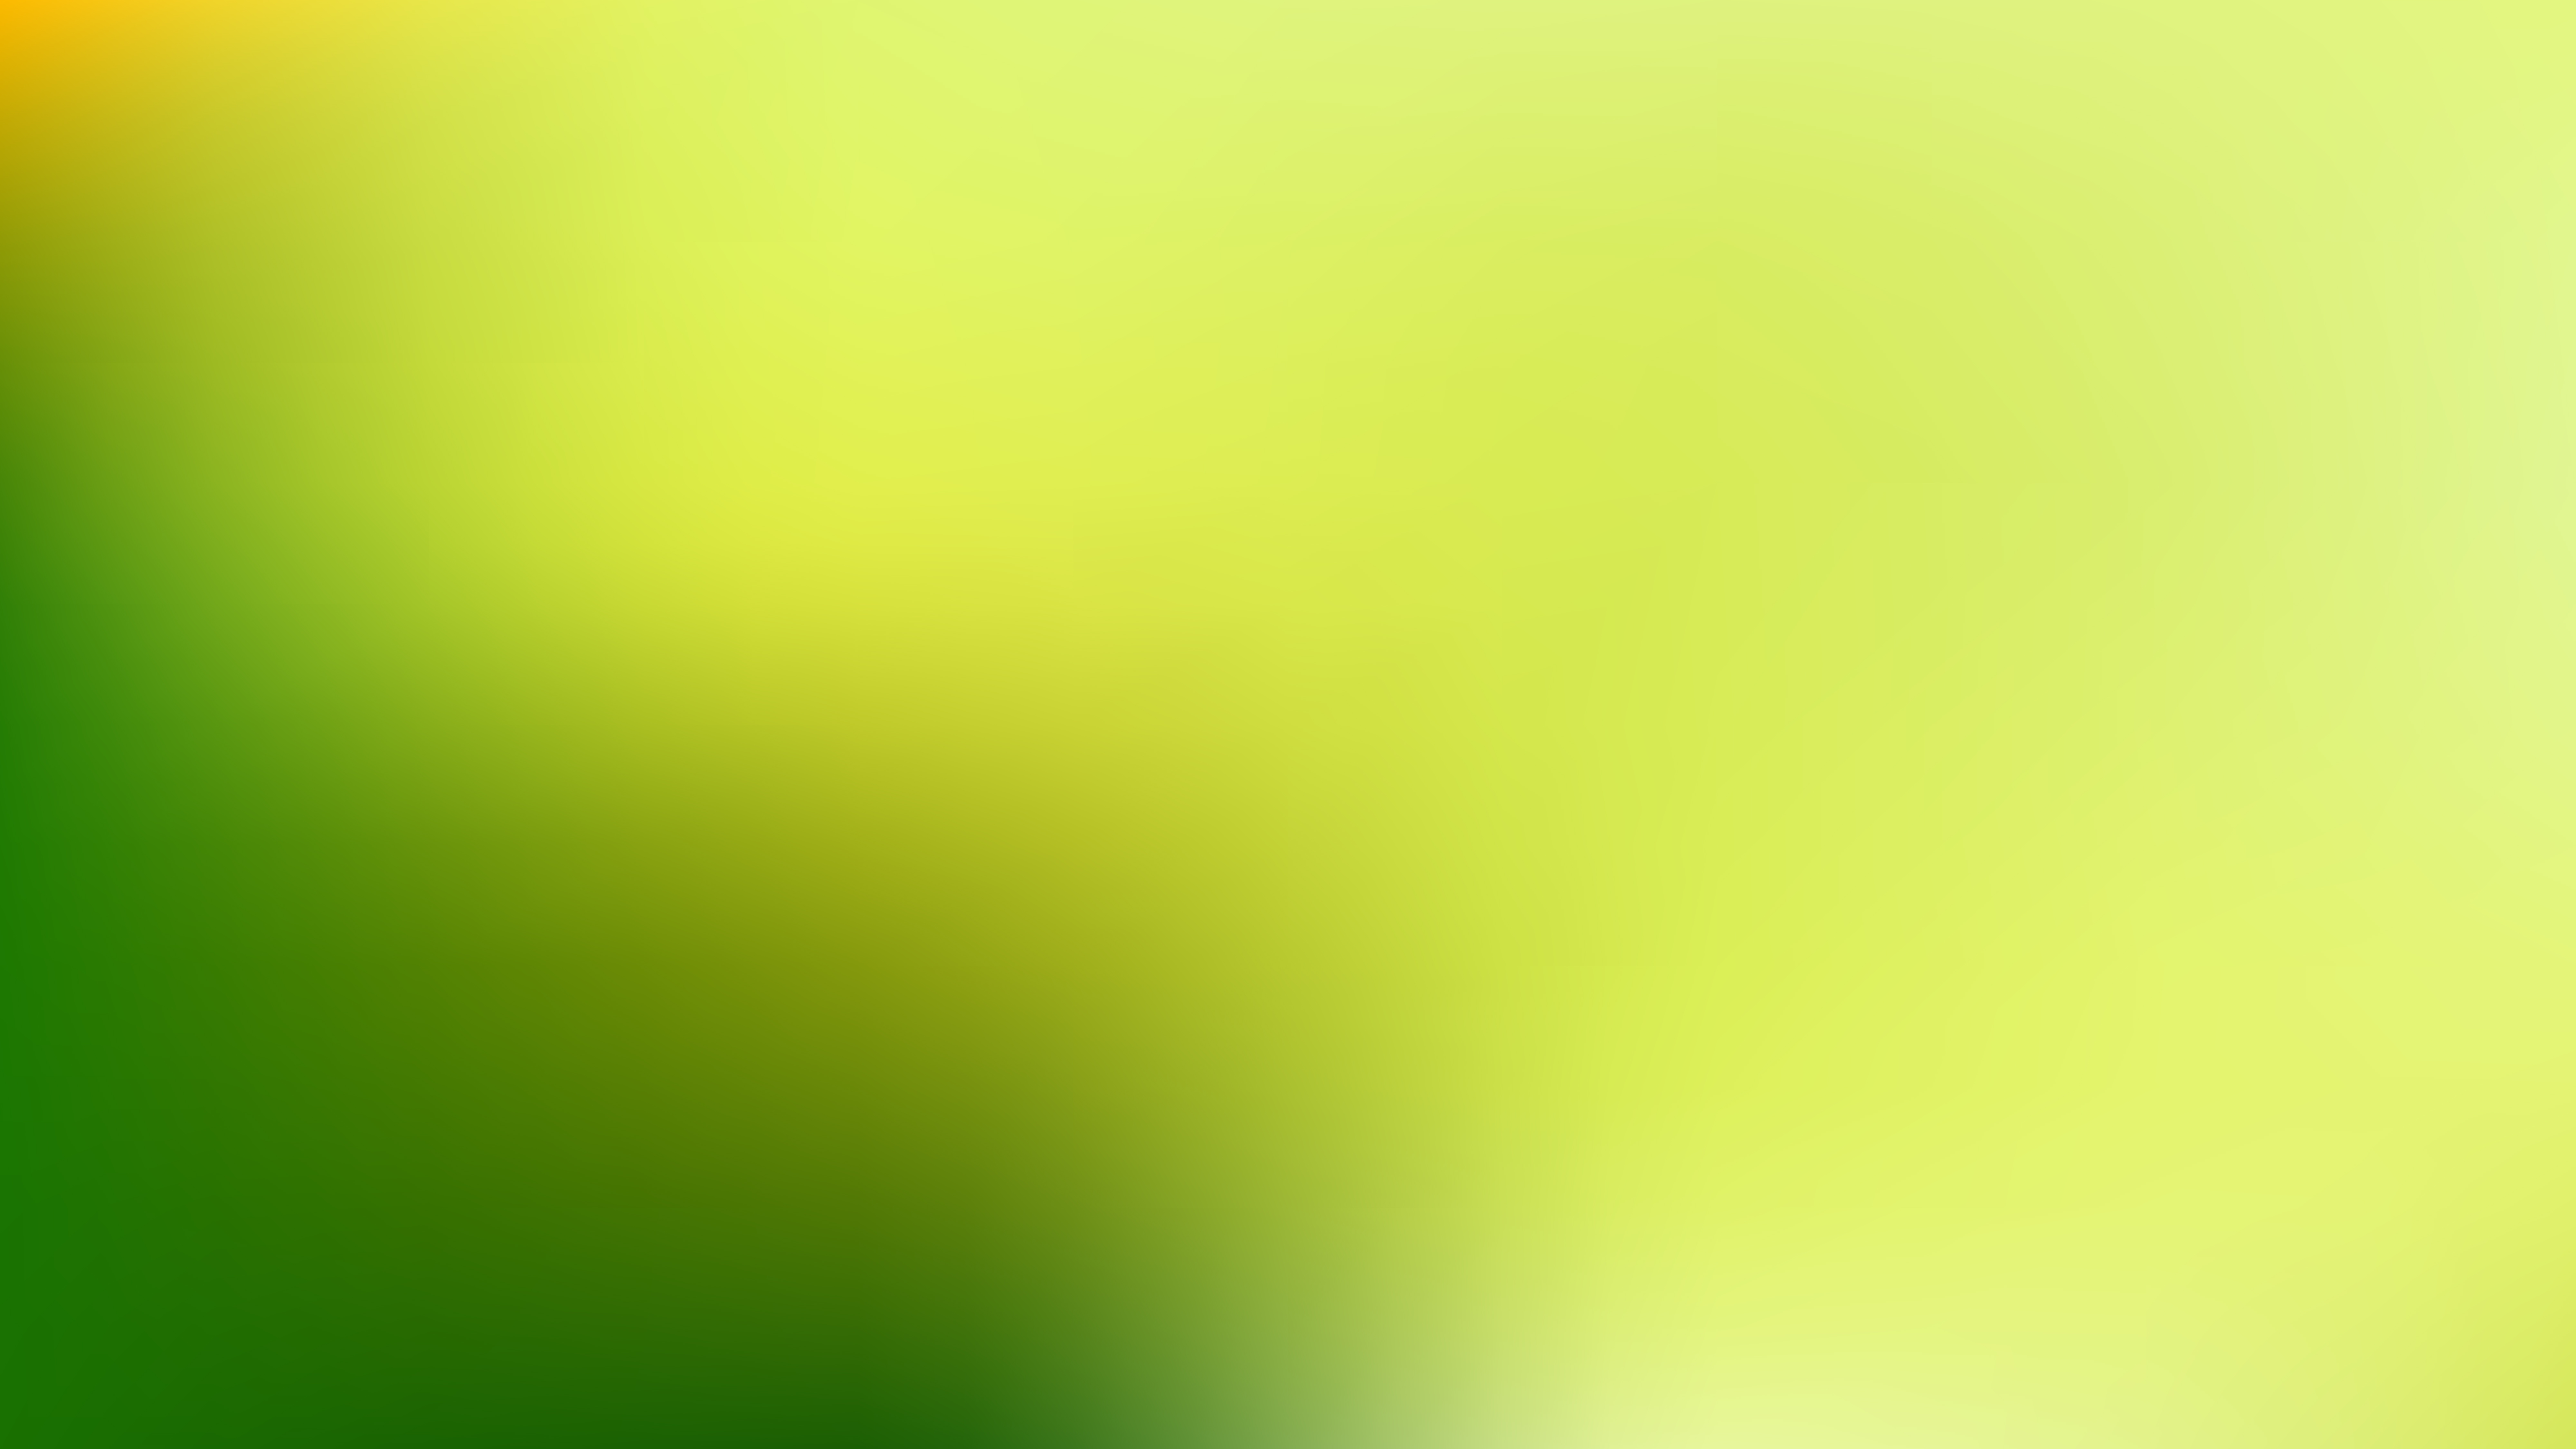 Free Green and Yellow PowerPoint Background